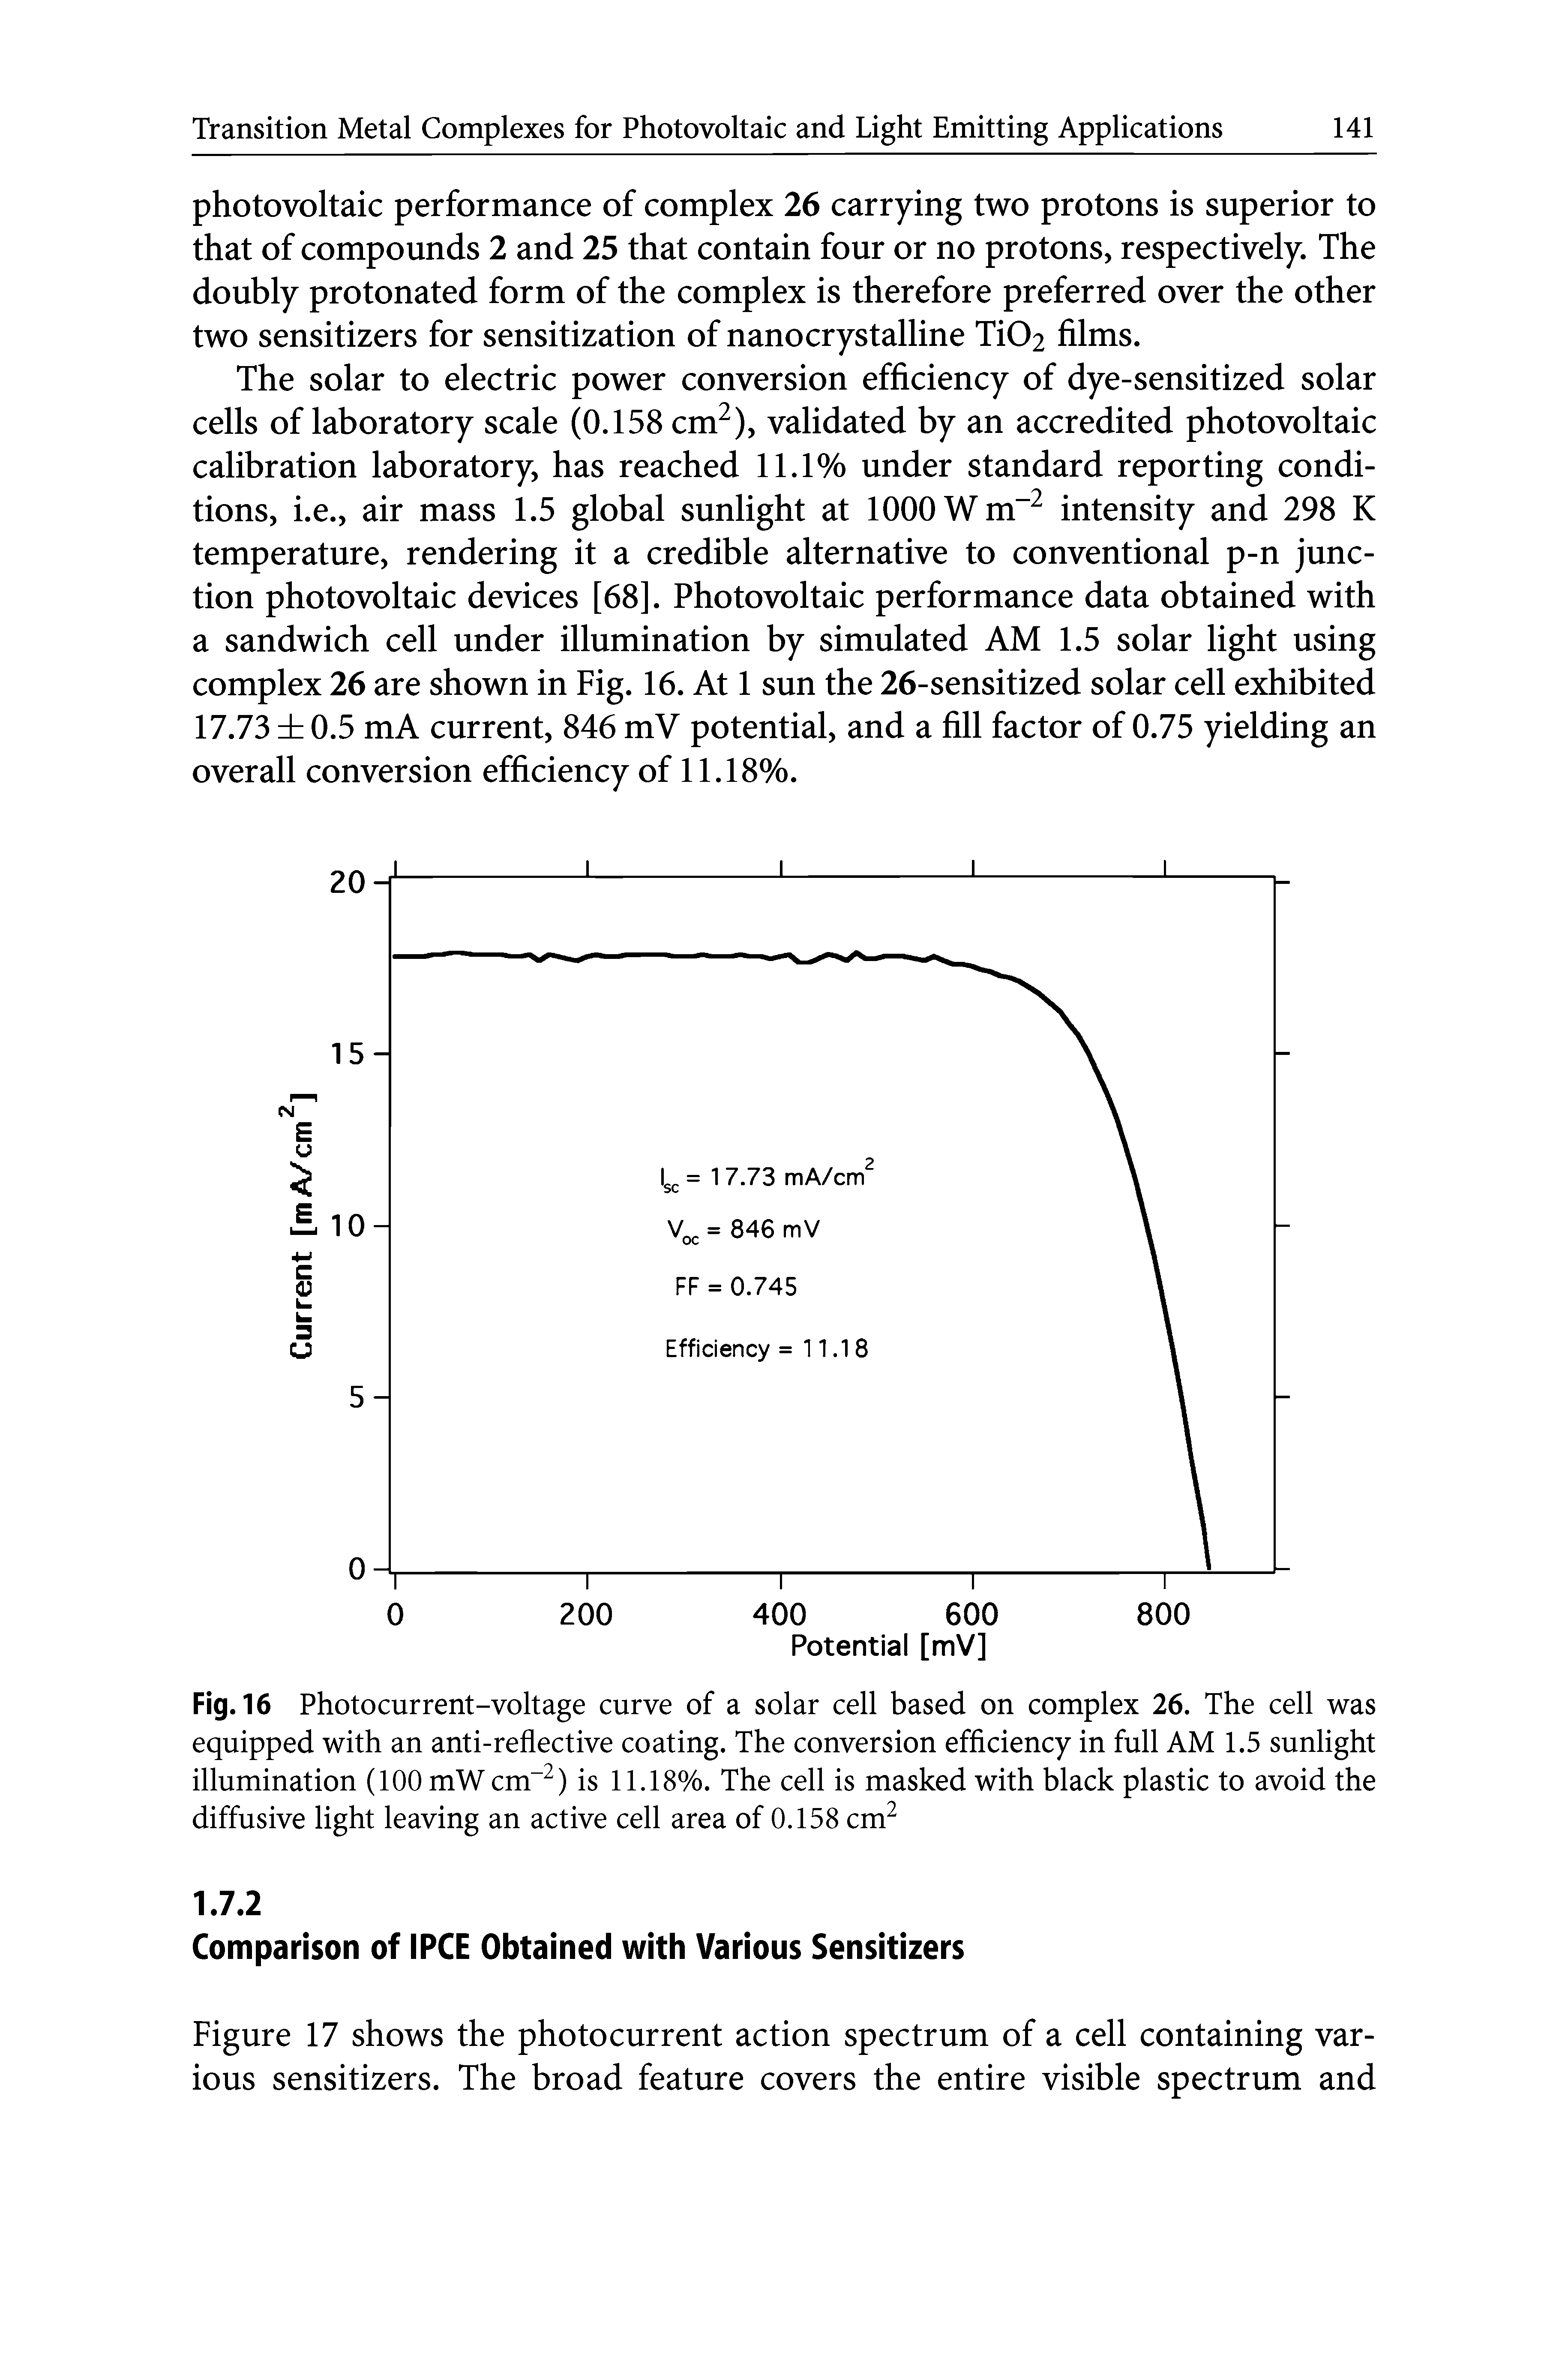 Fig. 16 Photocurrent-voltage curve of a solar cell based on complex 26. The cell was equipped with an anti-reflective coating. The conversion efficiency in full AM 1.5 sunlight illumination (100 mW cm-2) is 11.18%. The cell is masked with black plastic to avoid the diffusive light leaving an active cell area of 0.158 cm2...